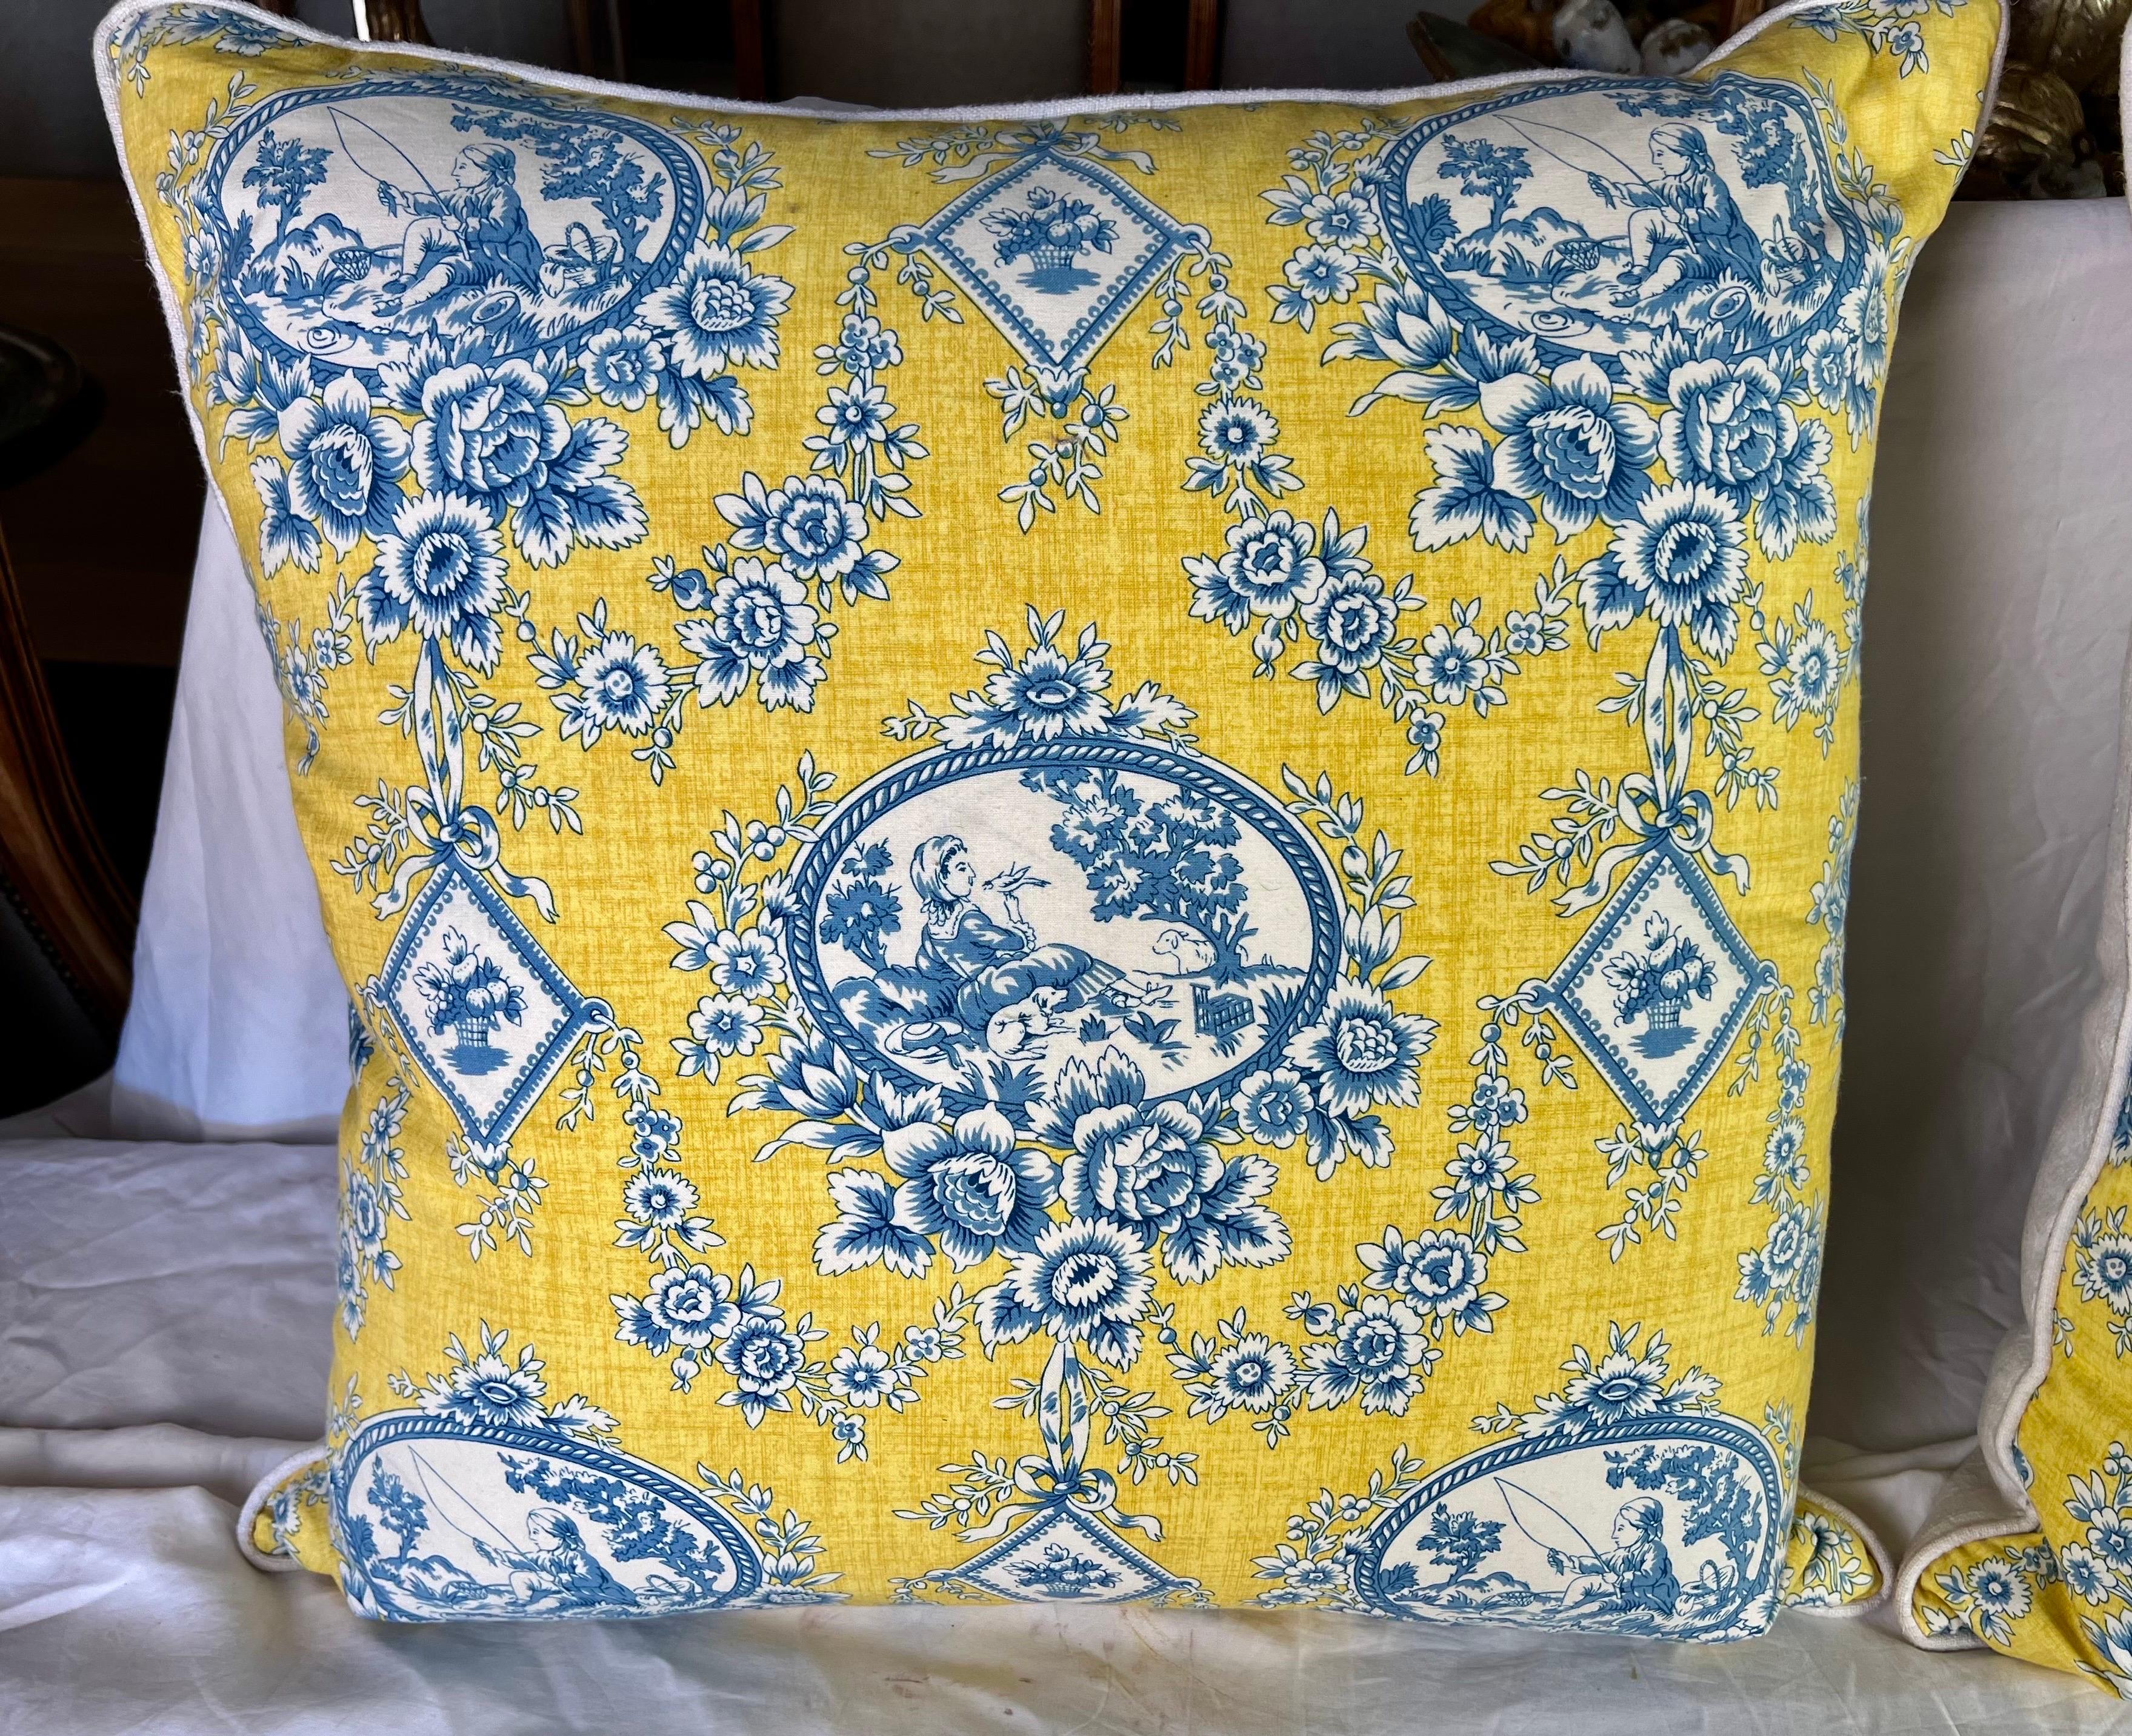 These 20th-century pillows have toile by Brunschwig & Fils in vibrant shades of yellow and blue. They feature geometric patterns, diamonds with bouquets of flowers, and charming scenes of children fishing and relaxing within cartouches.  Down-filled